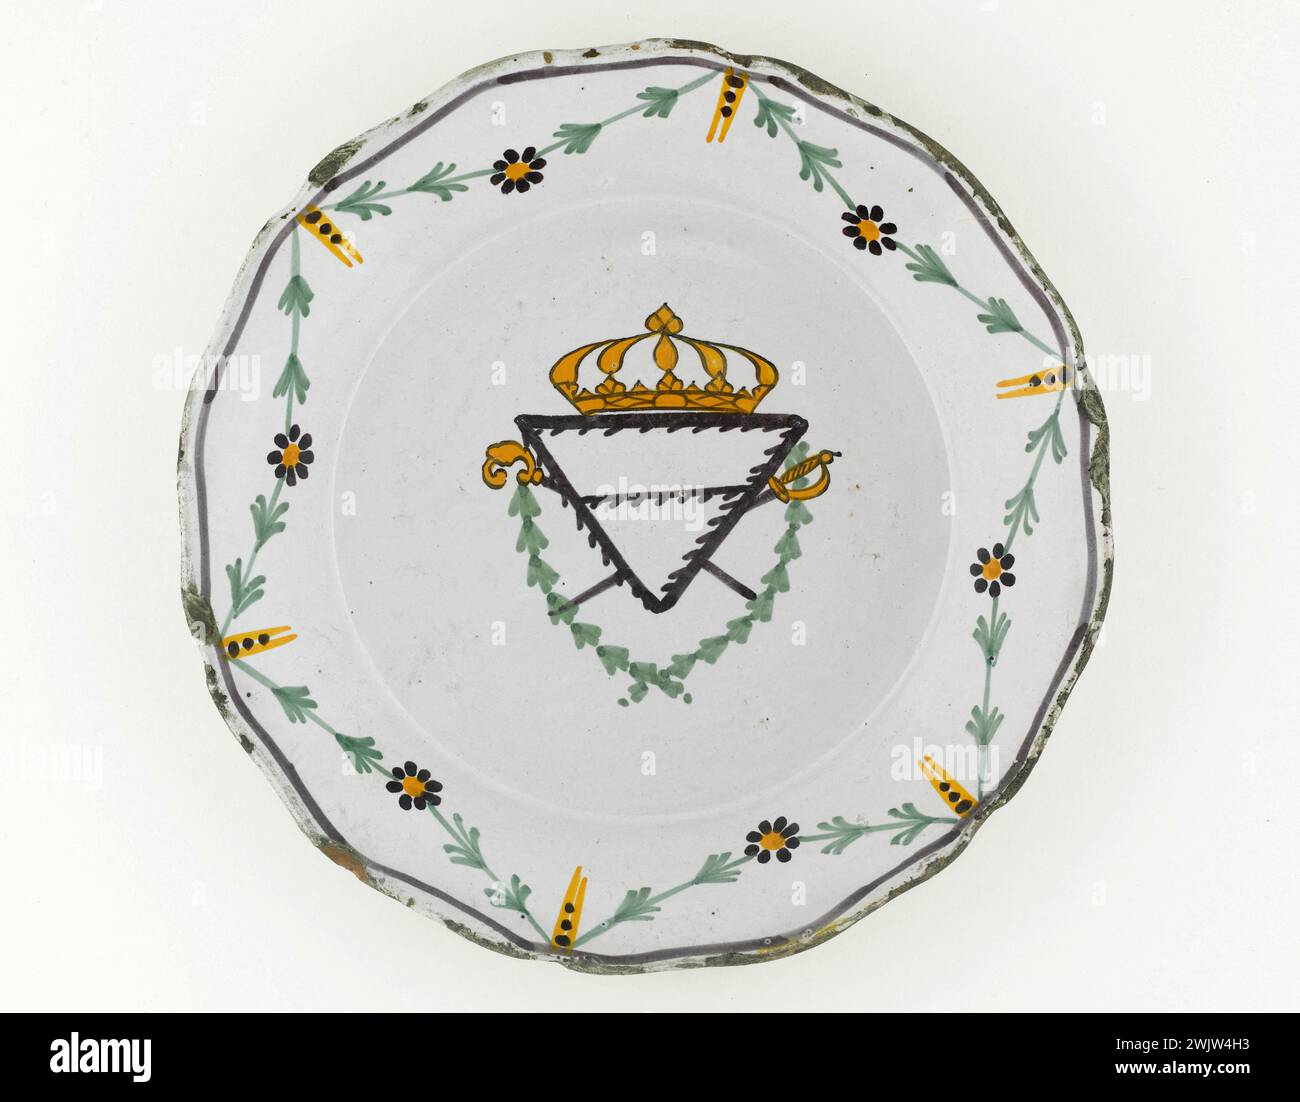 Anonymous. Plate. Earthenware. Around 1789. Paris, Carnavalet museum. 70955-48 Weapon, Crown, Epee, Faience, Flower, Decorative Pattern, Revolutionary Periode, Triangle, Crockery, Plate Stock Photo